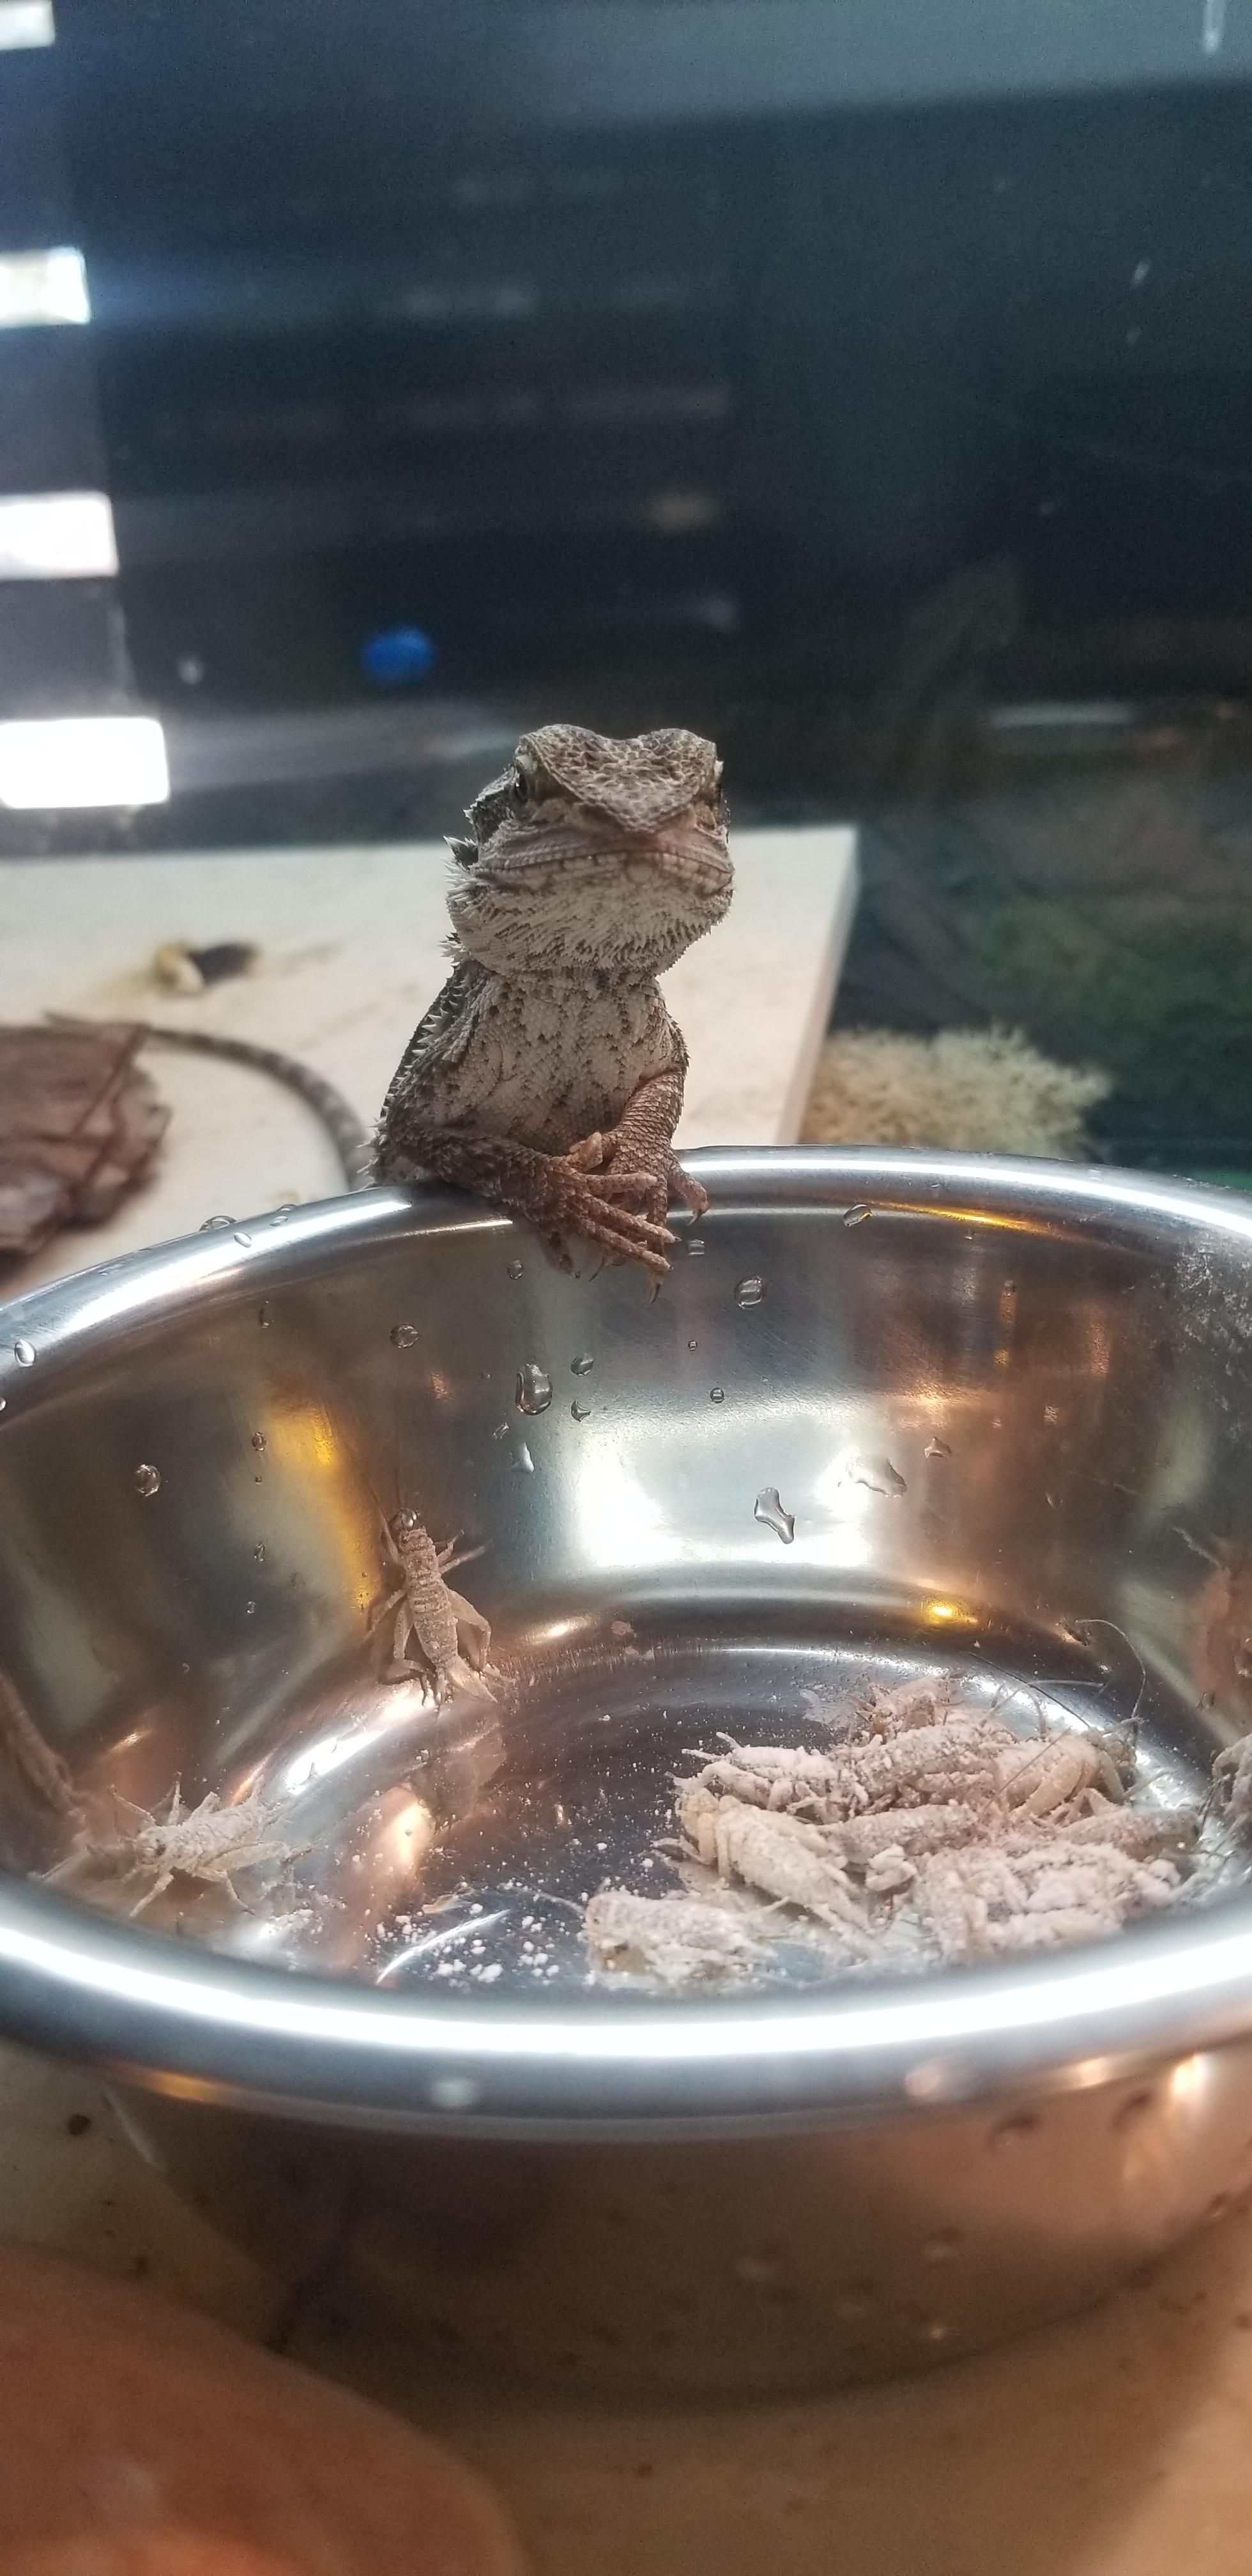 I dropped some crickets in her food bowl and she gives me this glimpse.